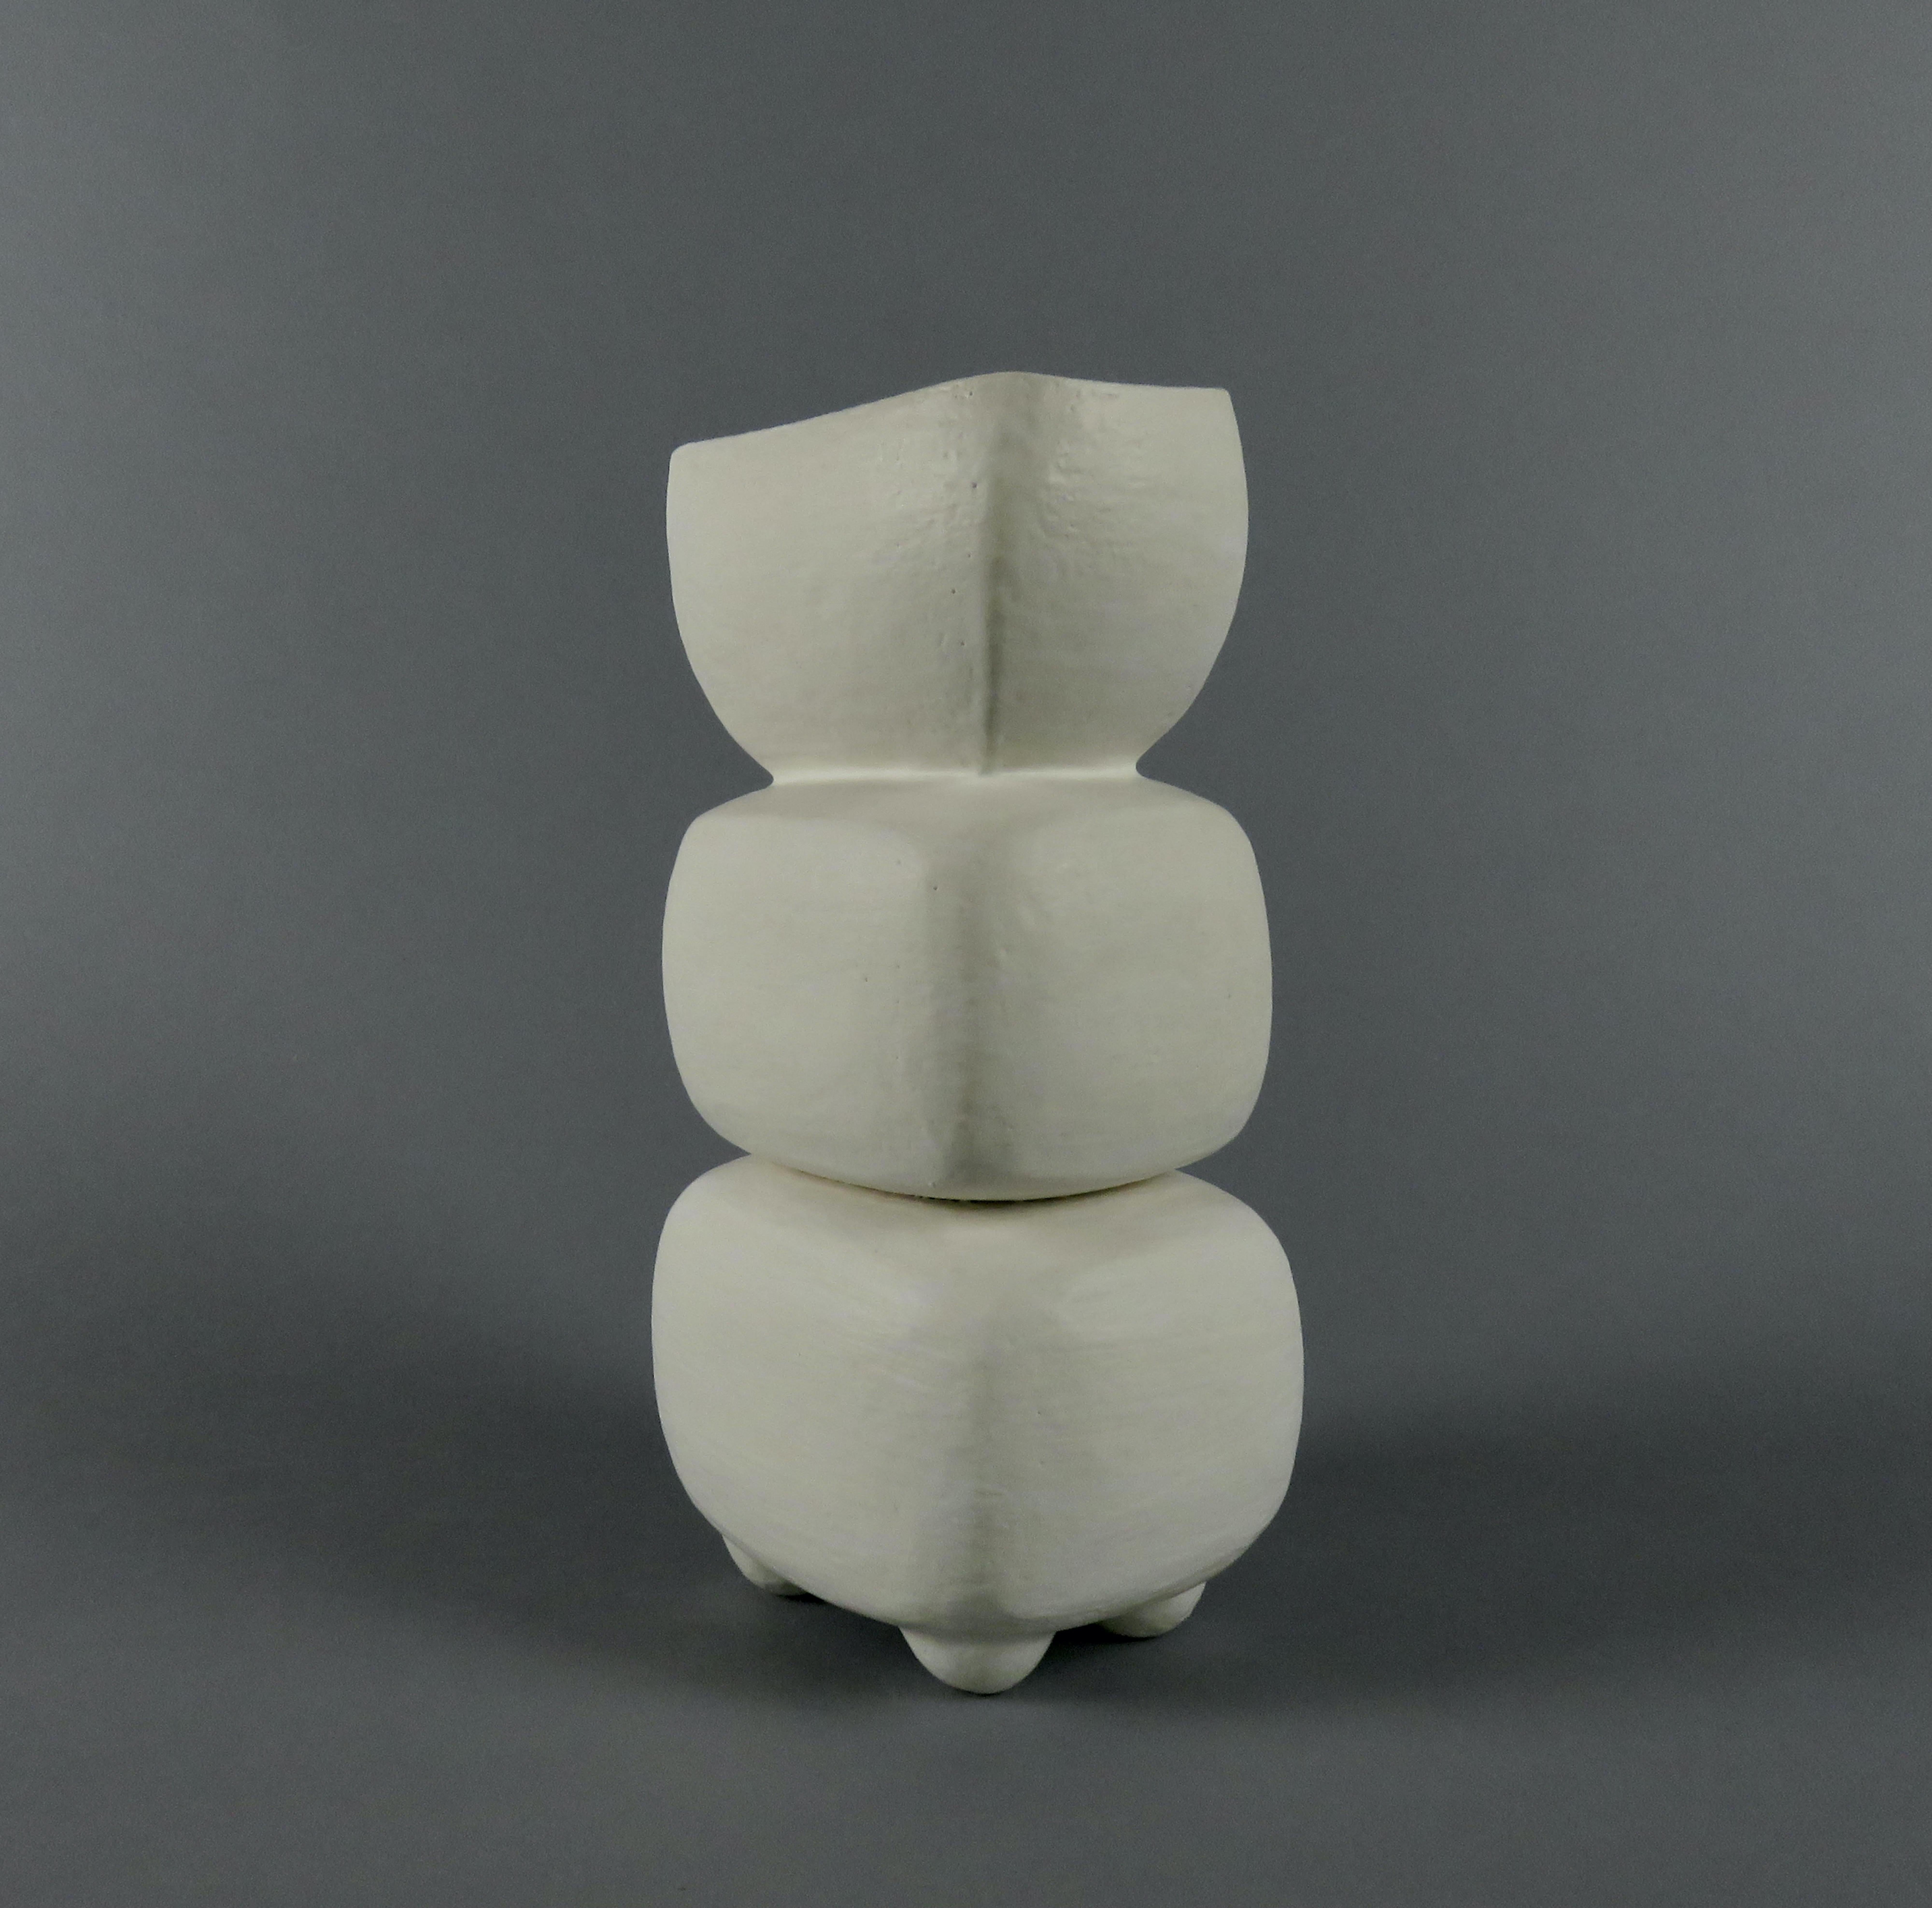 Glazed Creamy White 3-Part Totem, Rectangular Cup on Top, Hand Built Ceramic Sculpture For Sale